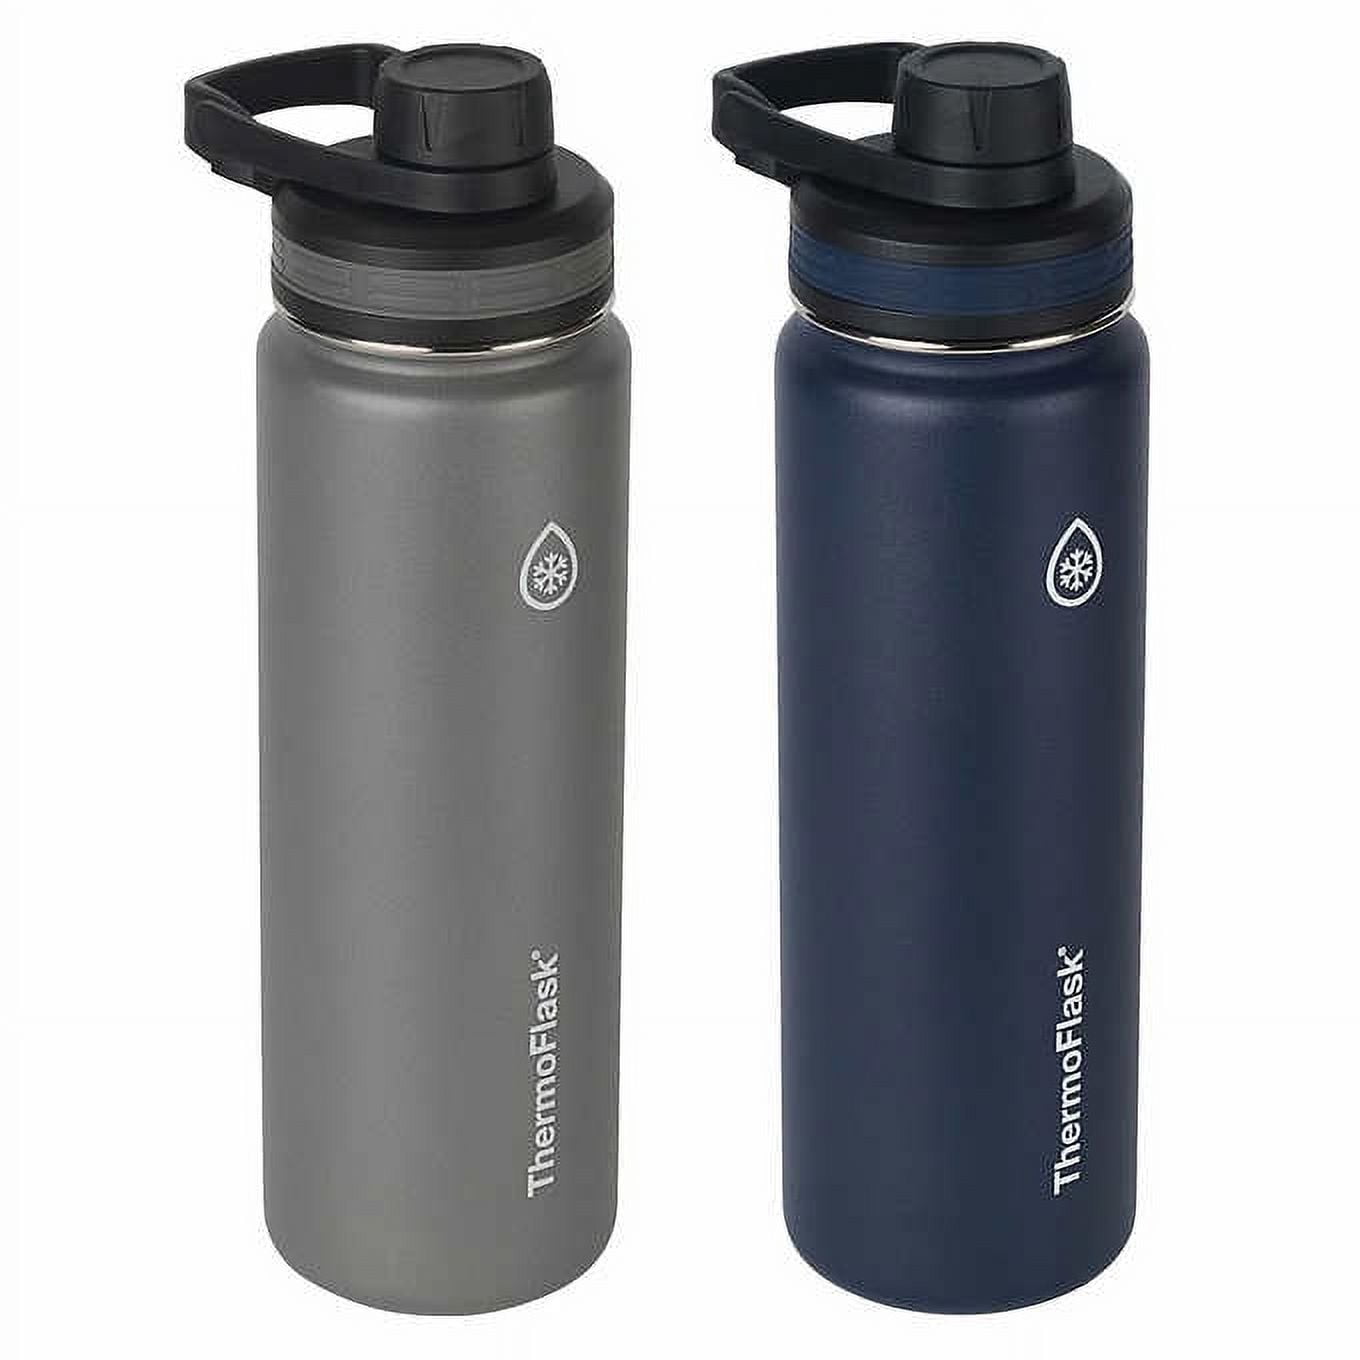 Replacement sleeve for 24 oz ThermoFlask bottle by Rom3oDelta7